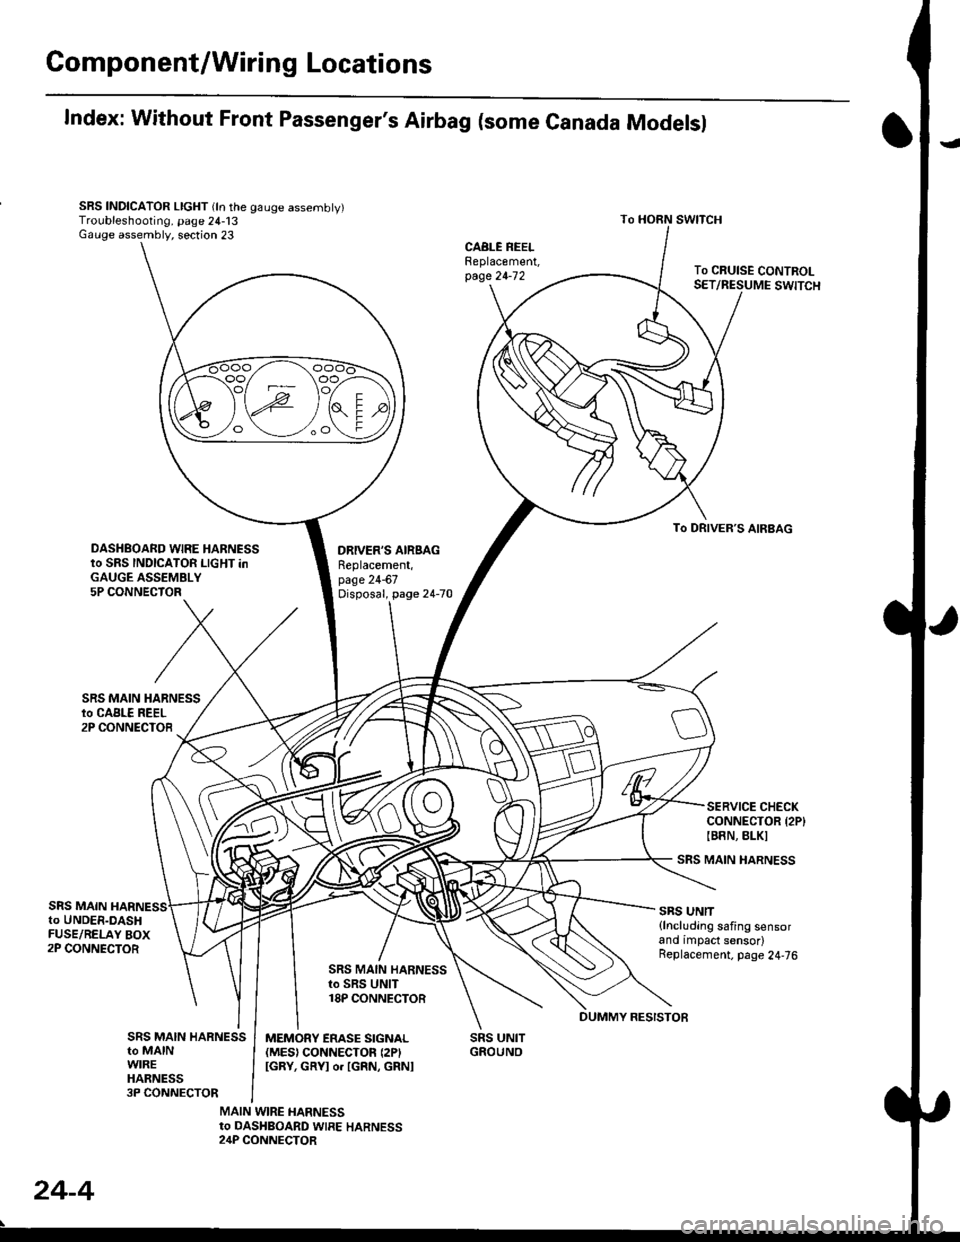 HONDA CIVIC 1996 6.G Owners Guide Gomponent/Wiring Locations
Index: Without Front Passengers Airbag (some Canada Modelsl
SRS INDICATOR LIGHT (ln the gauge assembly)Troubleshooting, page 24-13Gauge assembly, section 23
DRIVERS AIRSAG